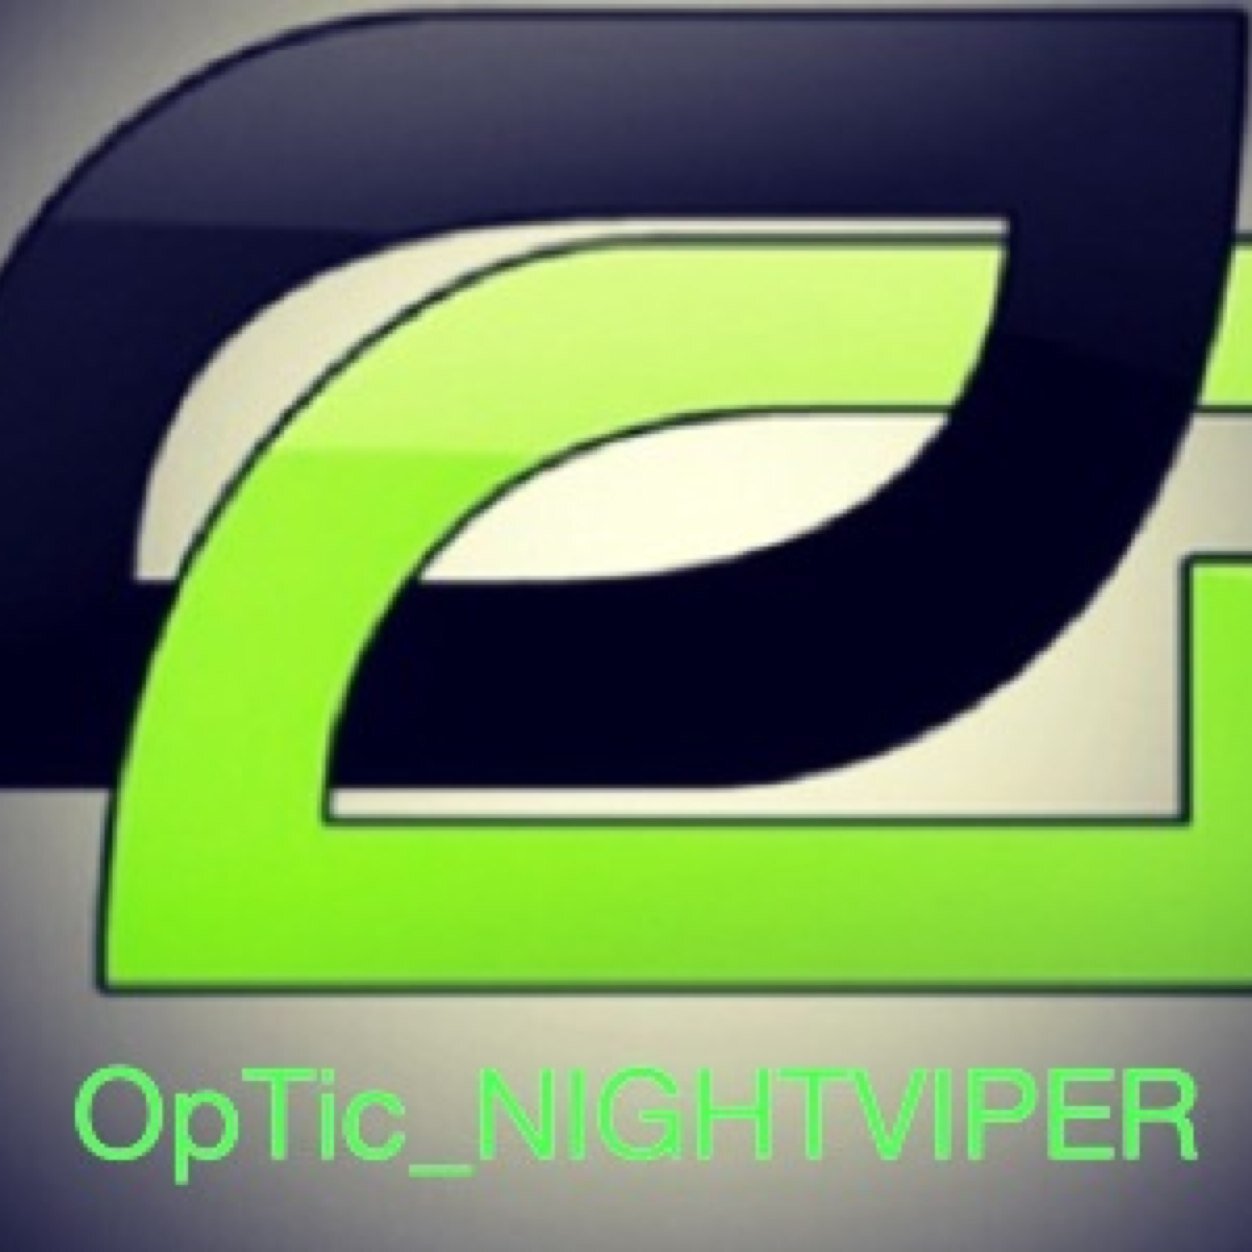 13|pro cod player| objective/sniper for @OpTicNATIONPS3|i may be young but i can game|psn-OpTic_NIGHTVIPER|YOLO|#GreenWall